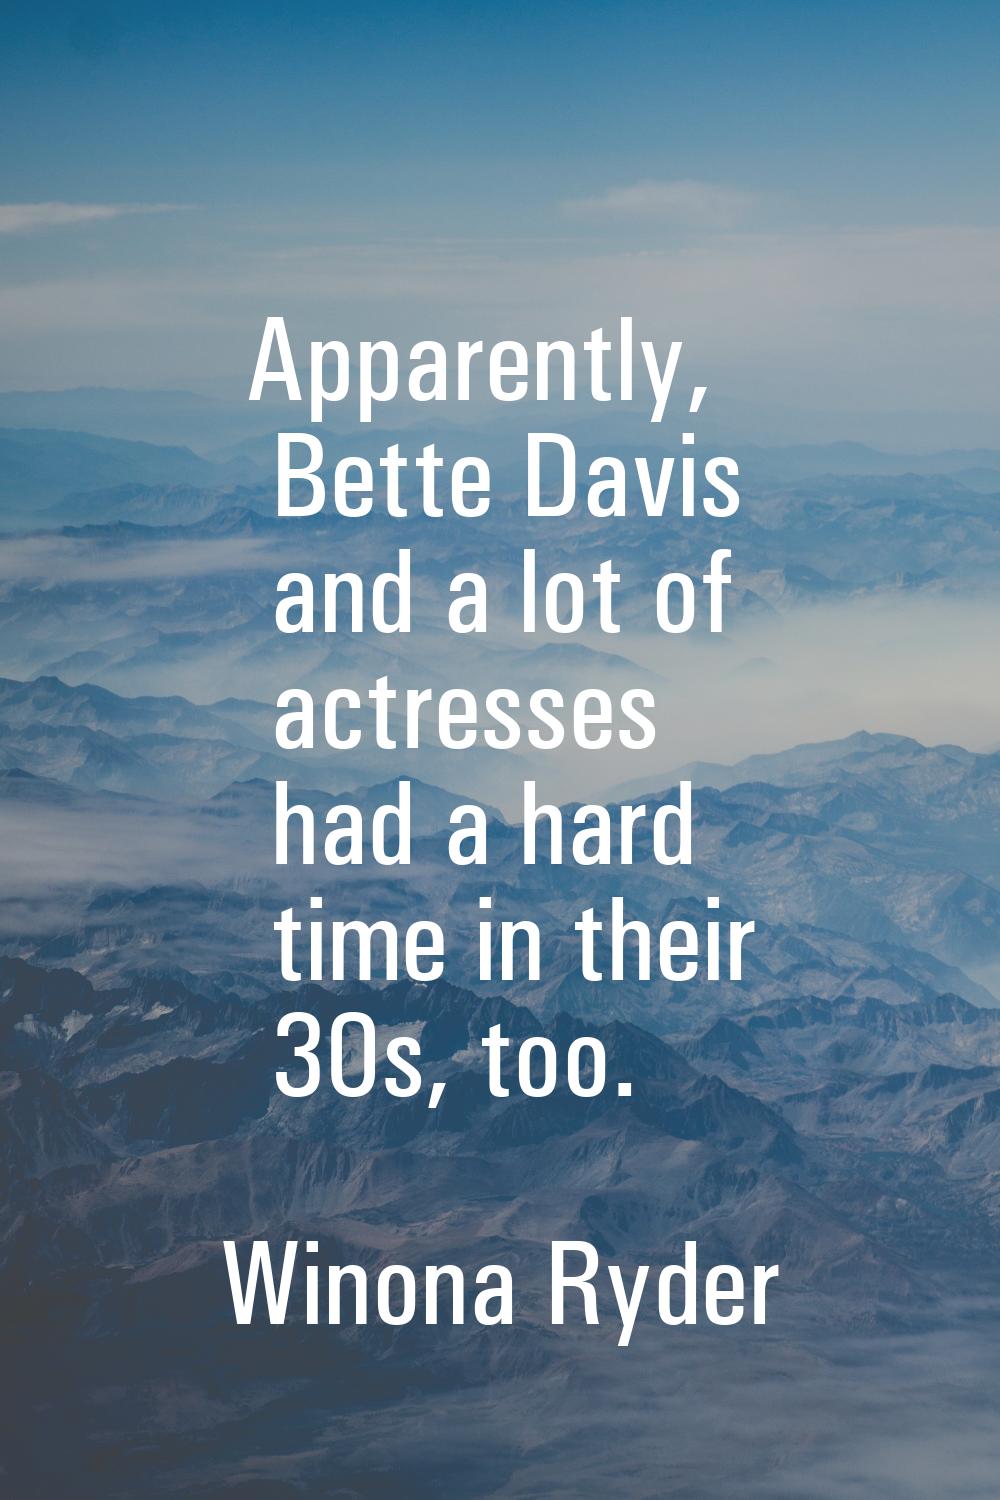 Apparently, Bette Davis and a lot of actresses had a hard time in their 30s, too.